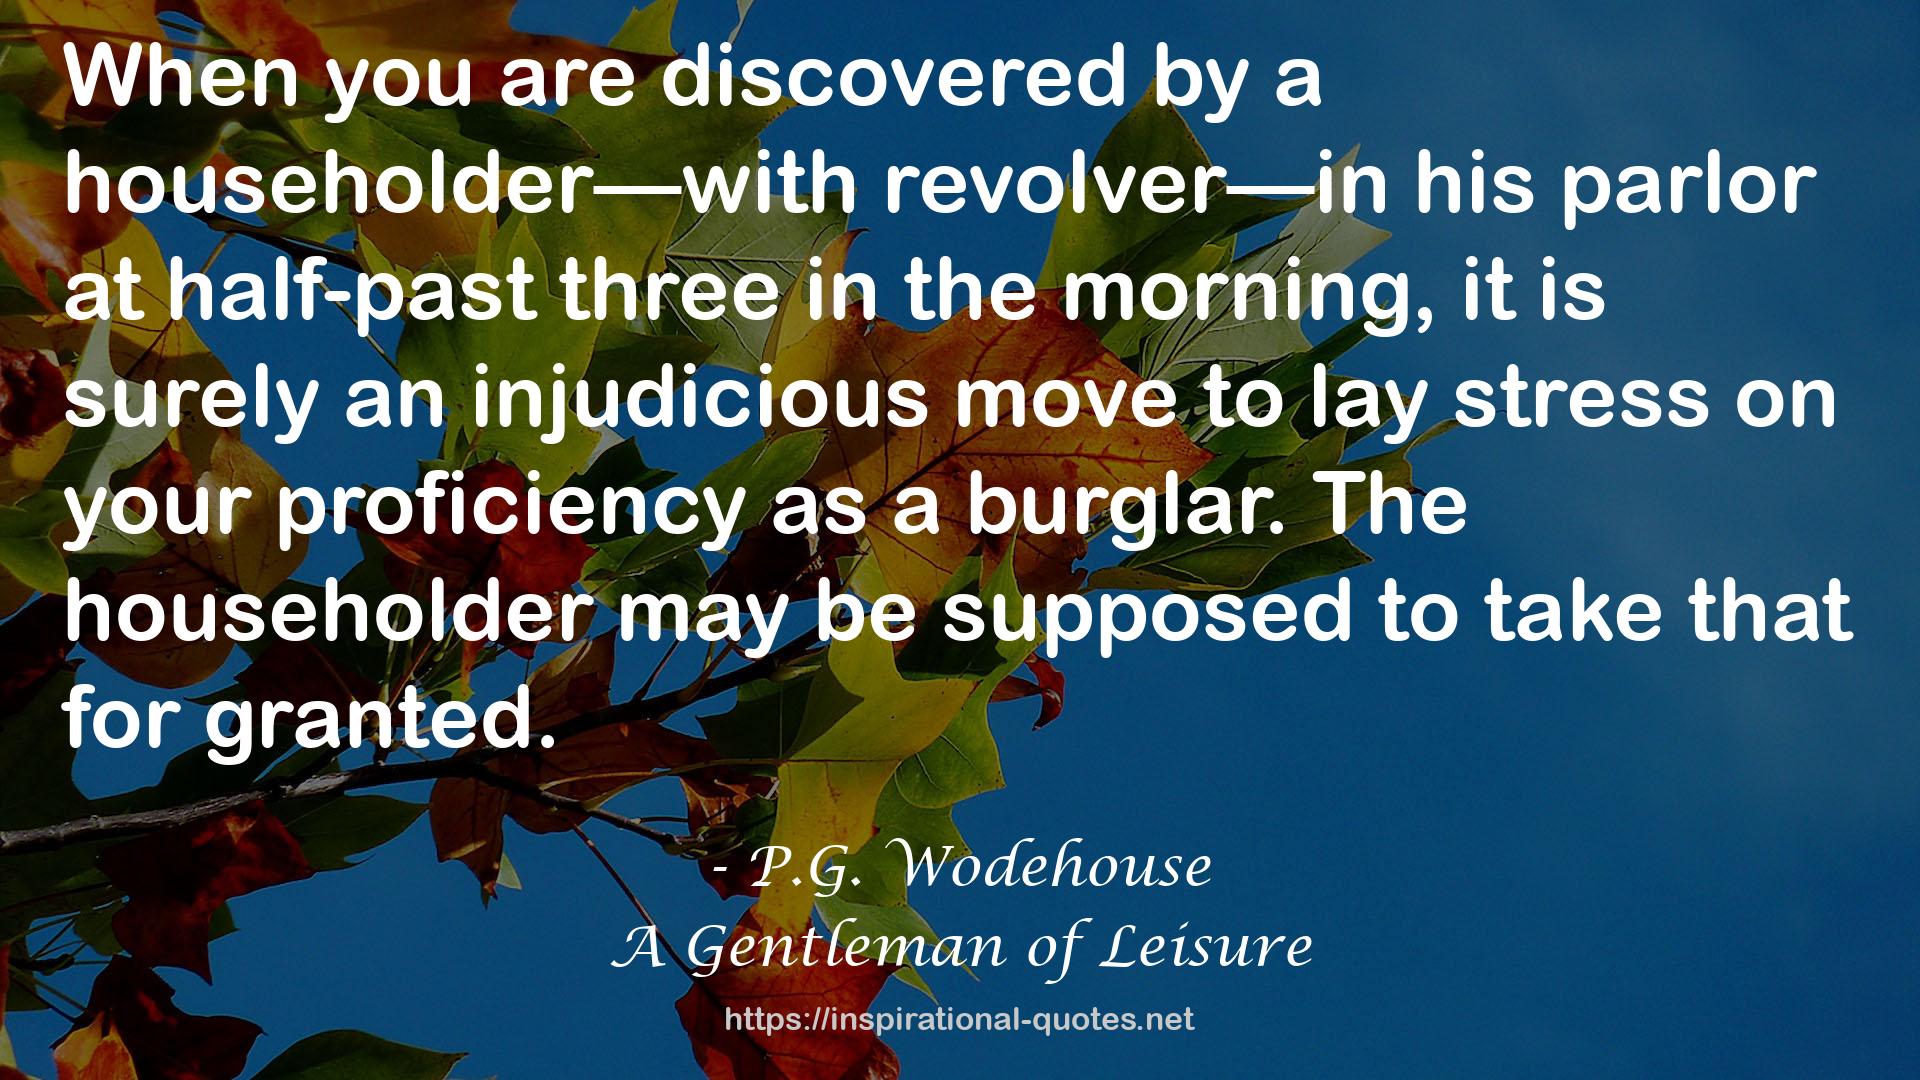 A Gentleman of Leisure QUOTES